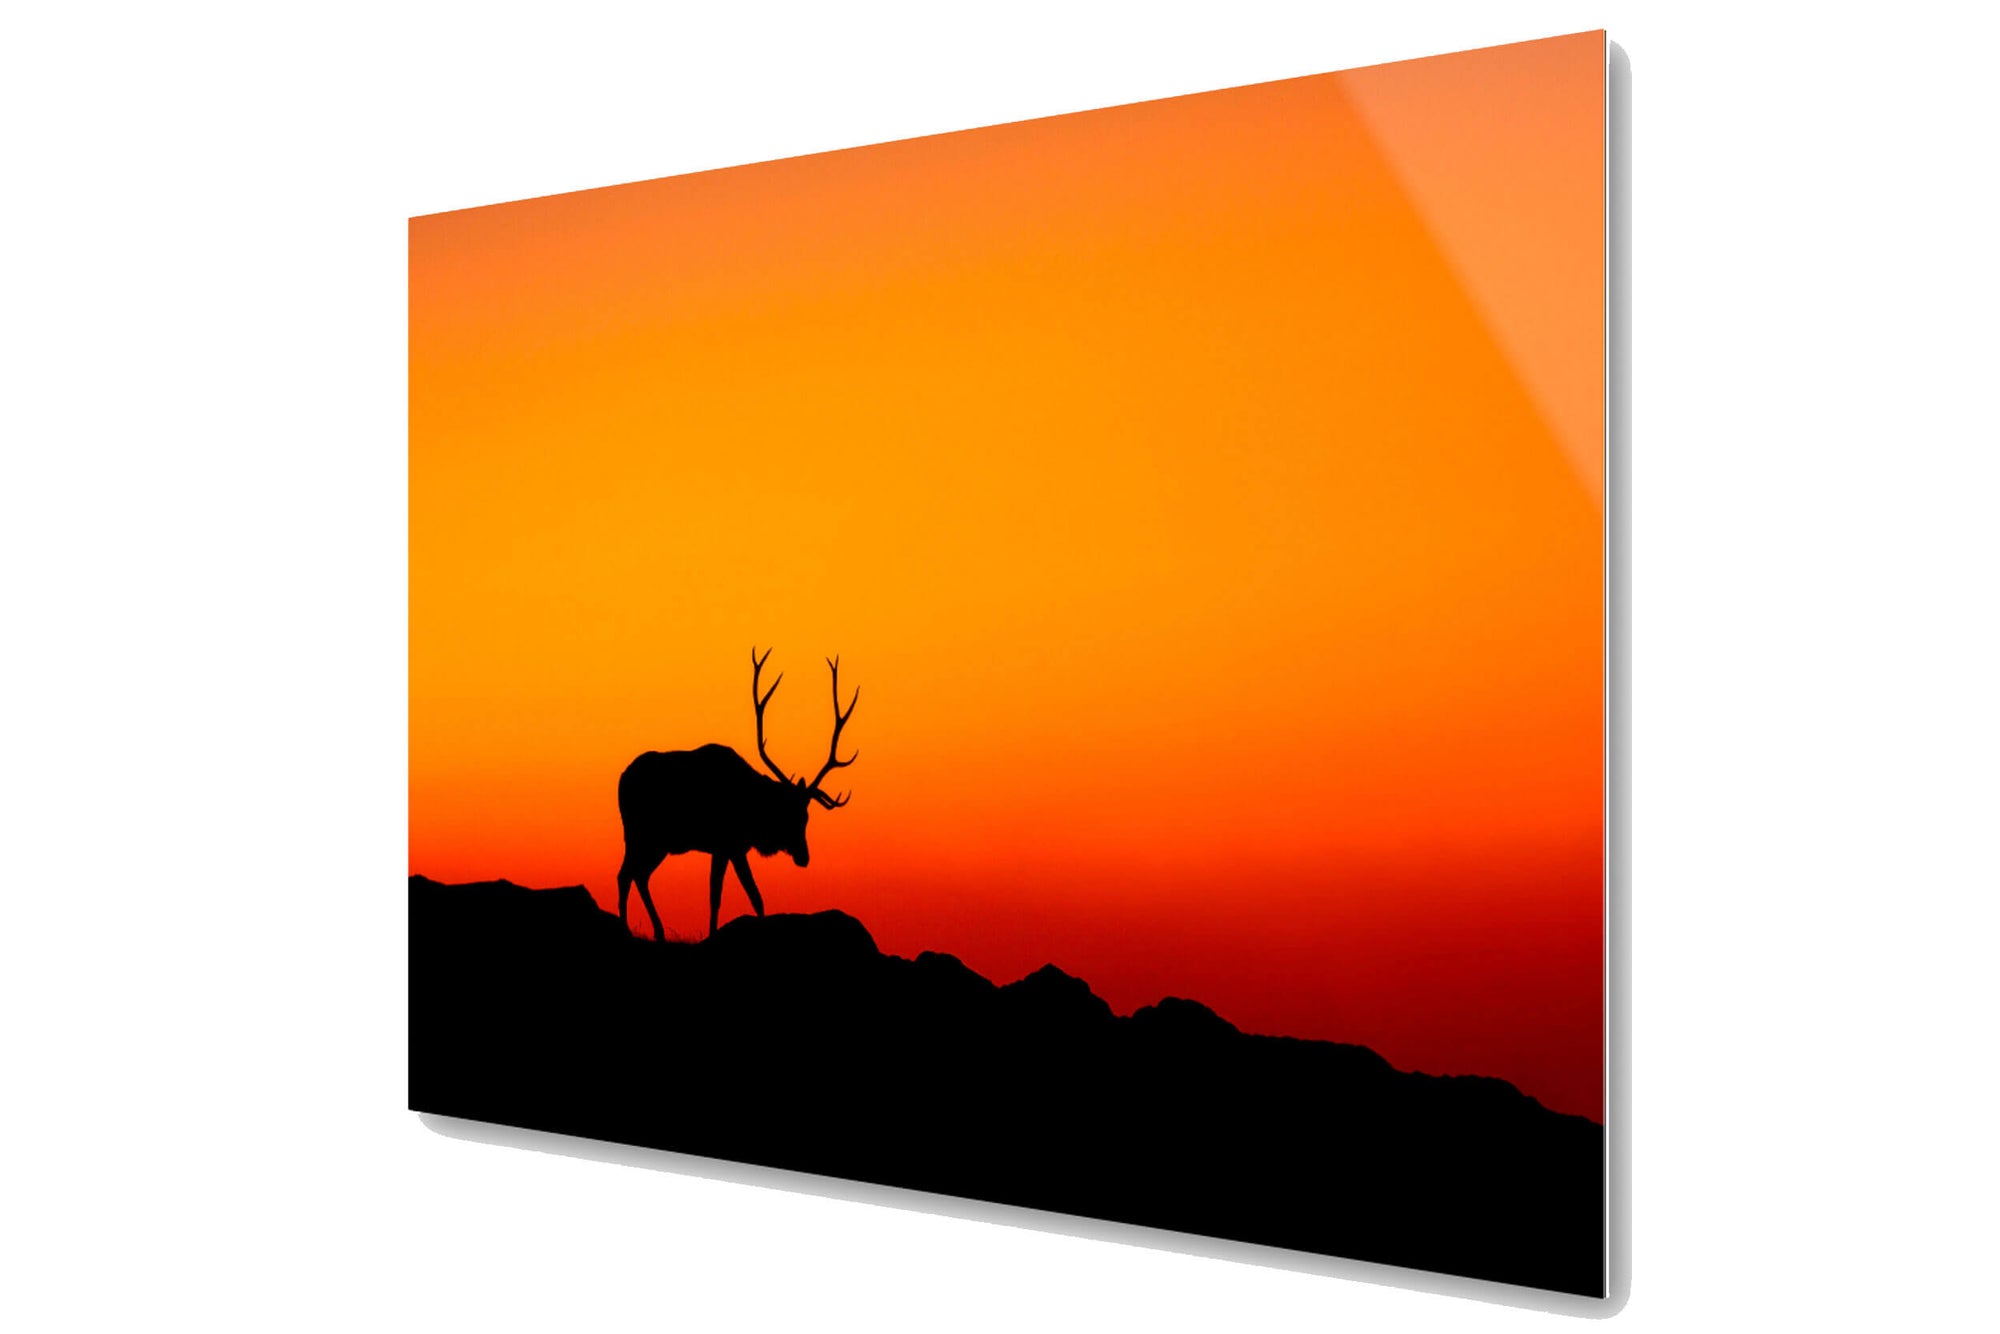 A TruLife acrylic elk picture from Trail Ridge Road in Rocky Mountain National Park.